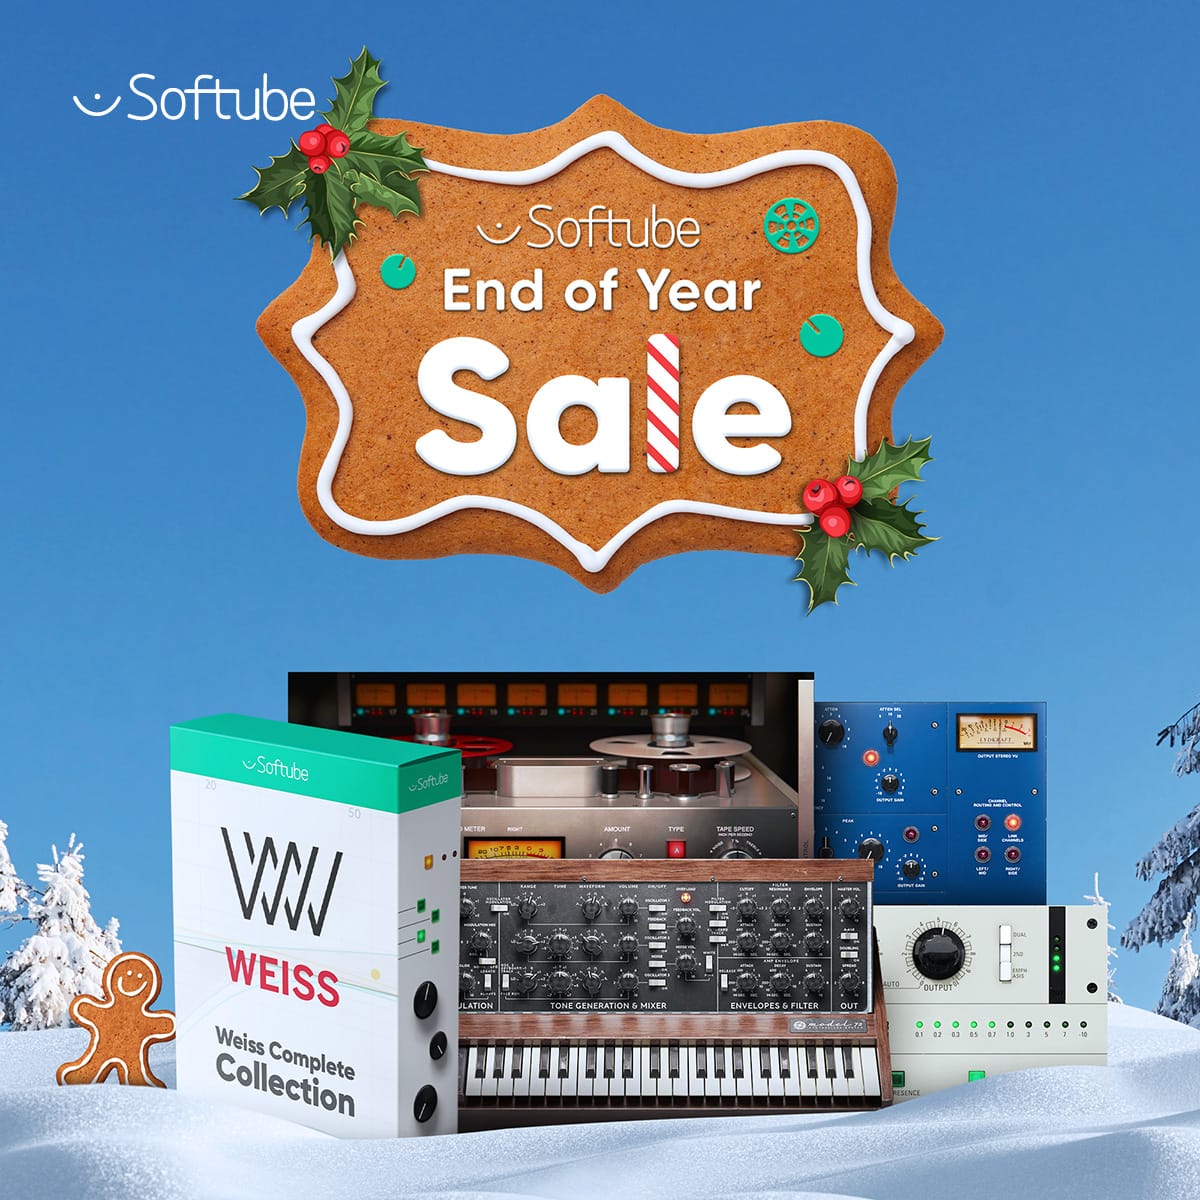 Softube、最大75%オフの「END OF YEAR SALE」開催